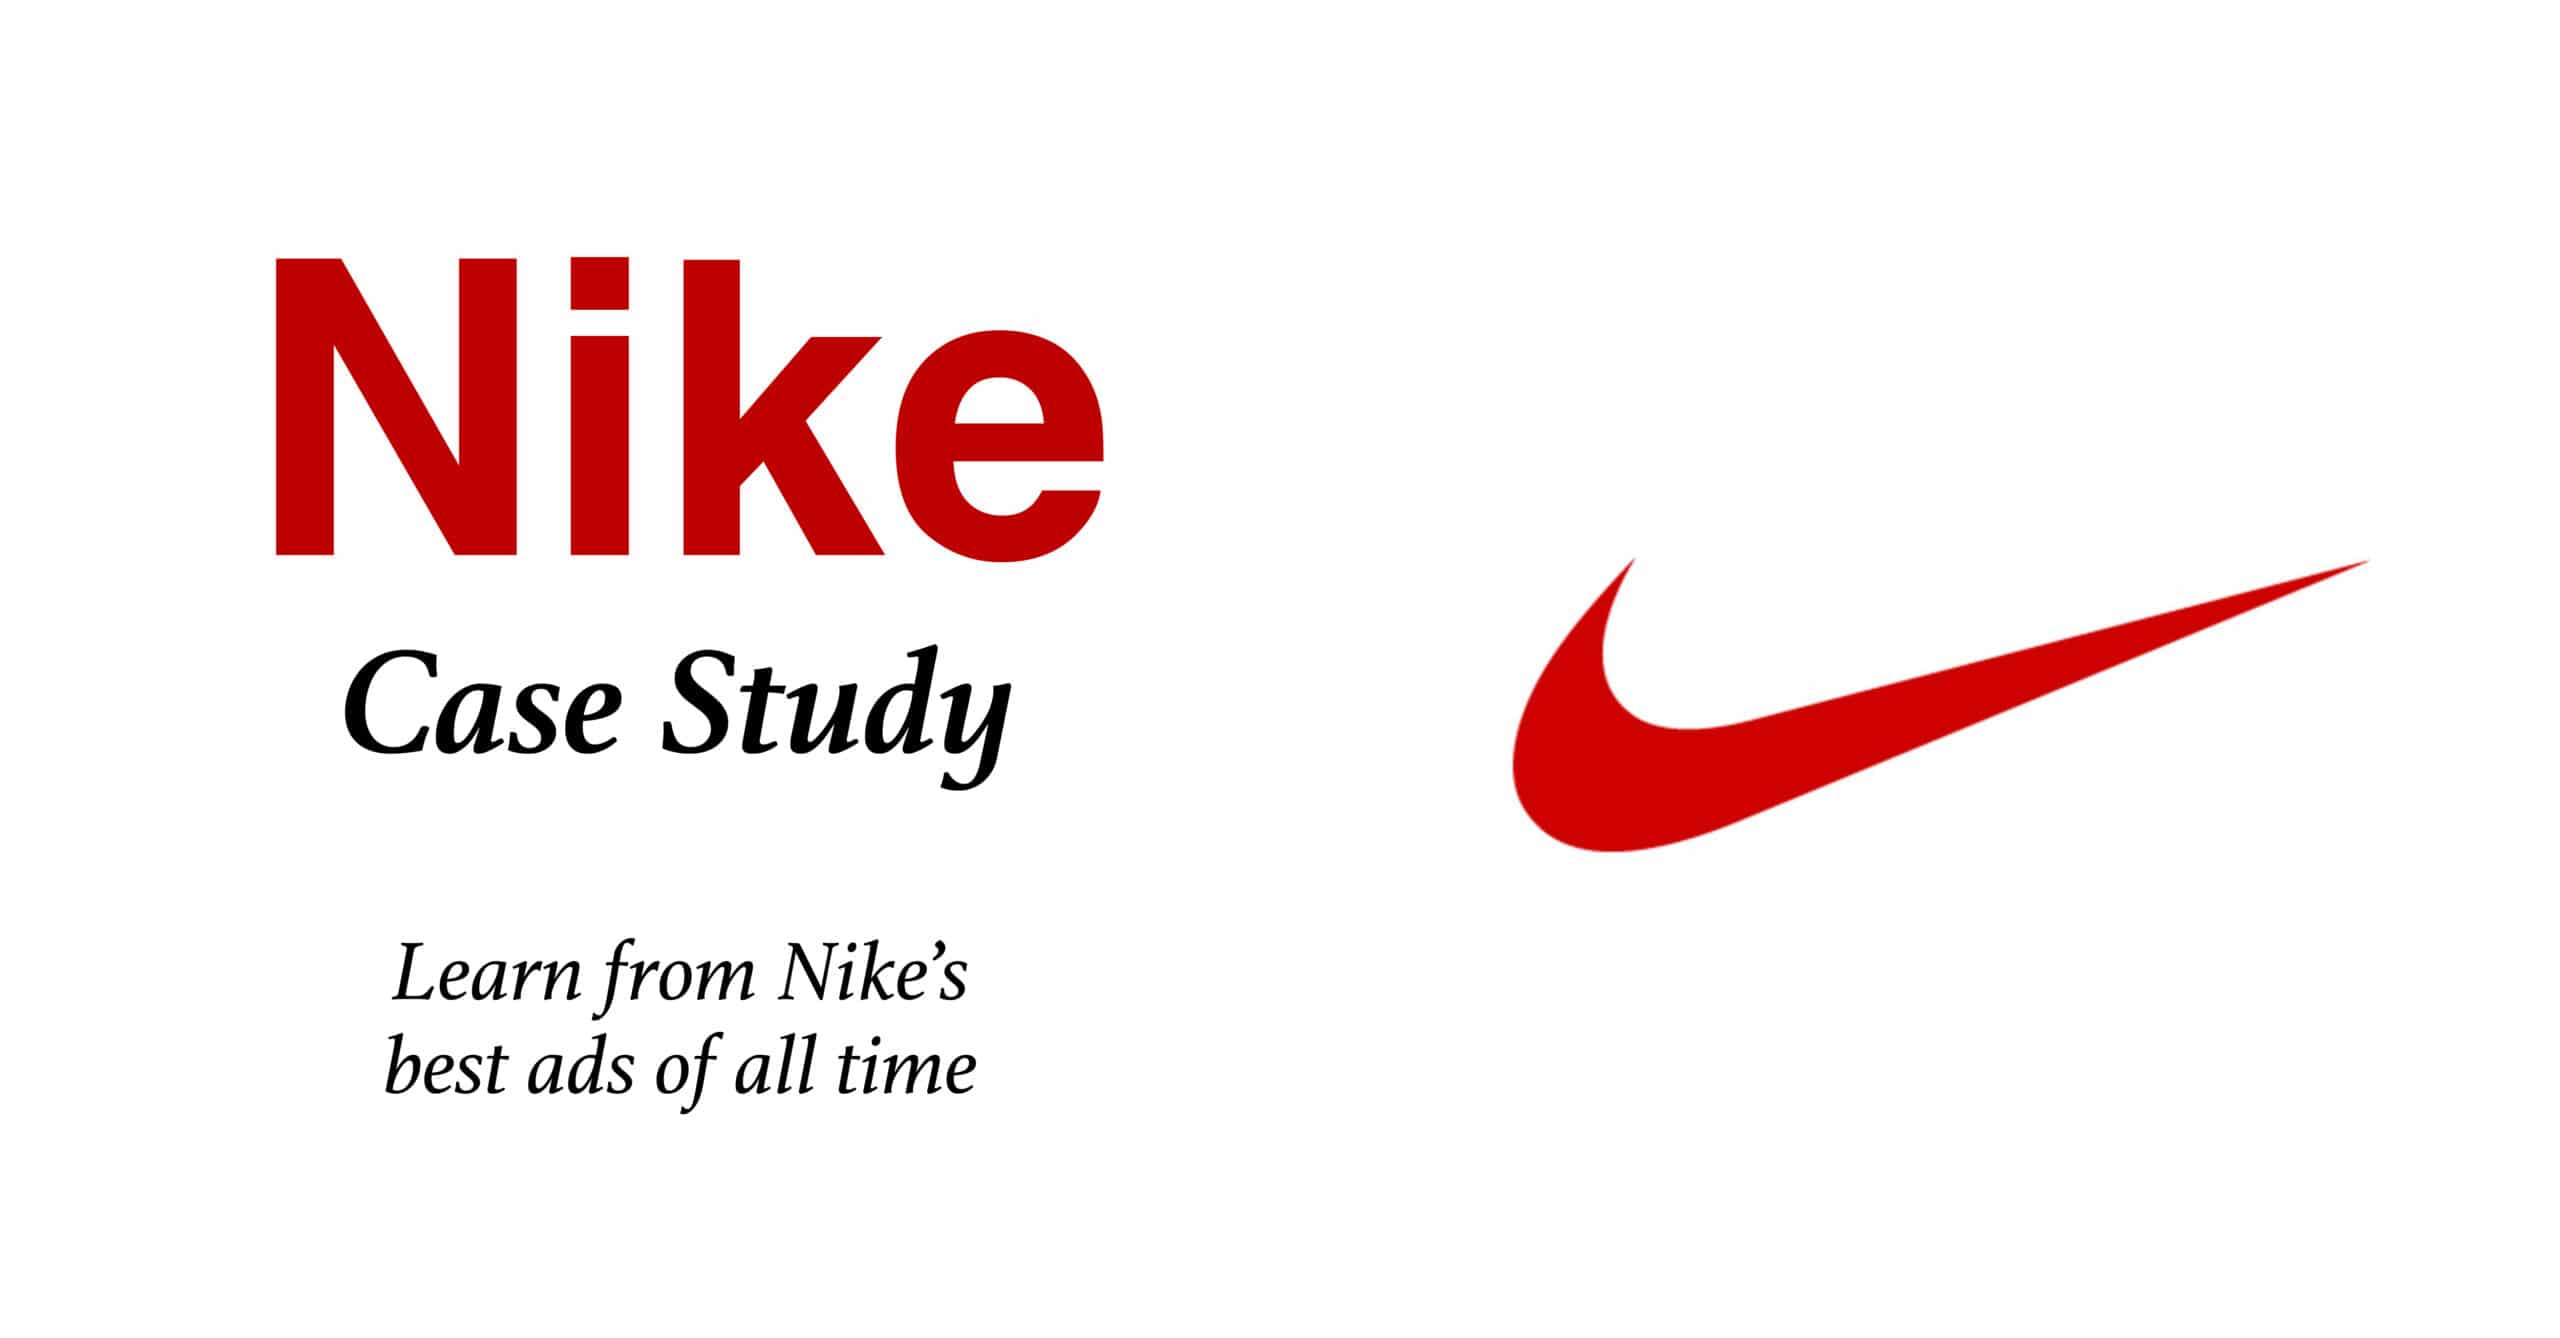 Alacena Rebaño salado Nike case study: Get inspired by the best Nike ads of all time